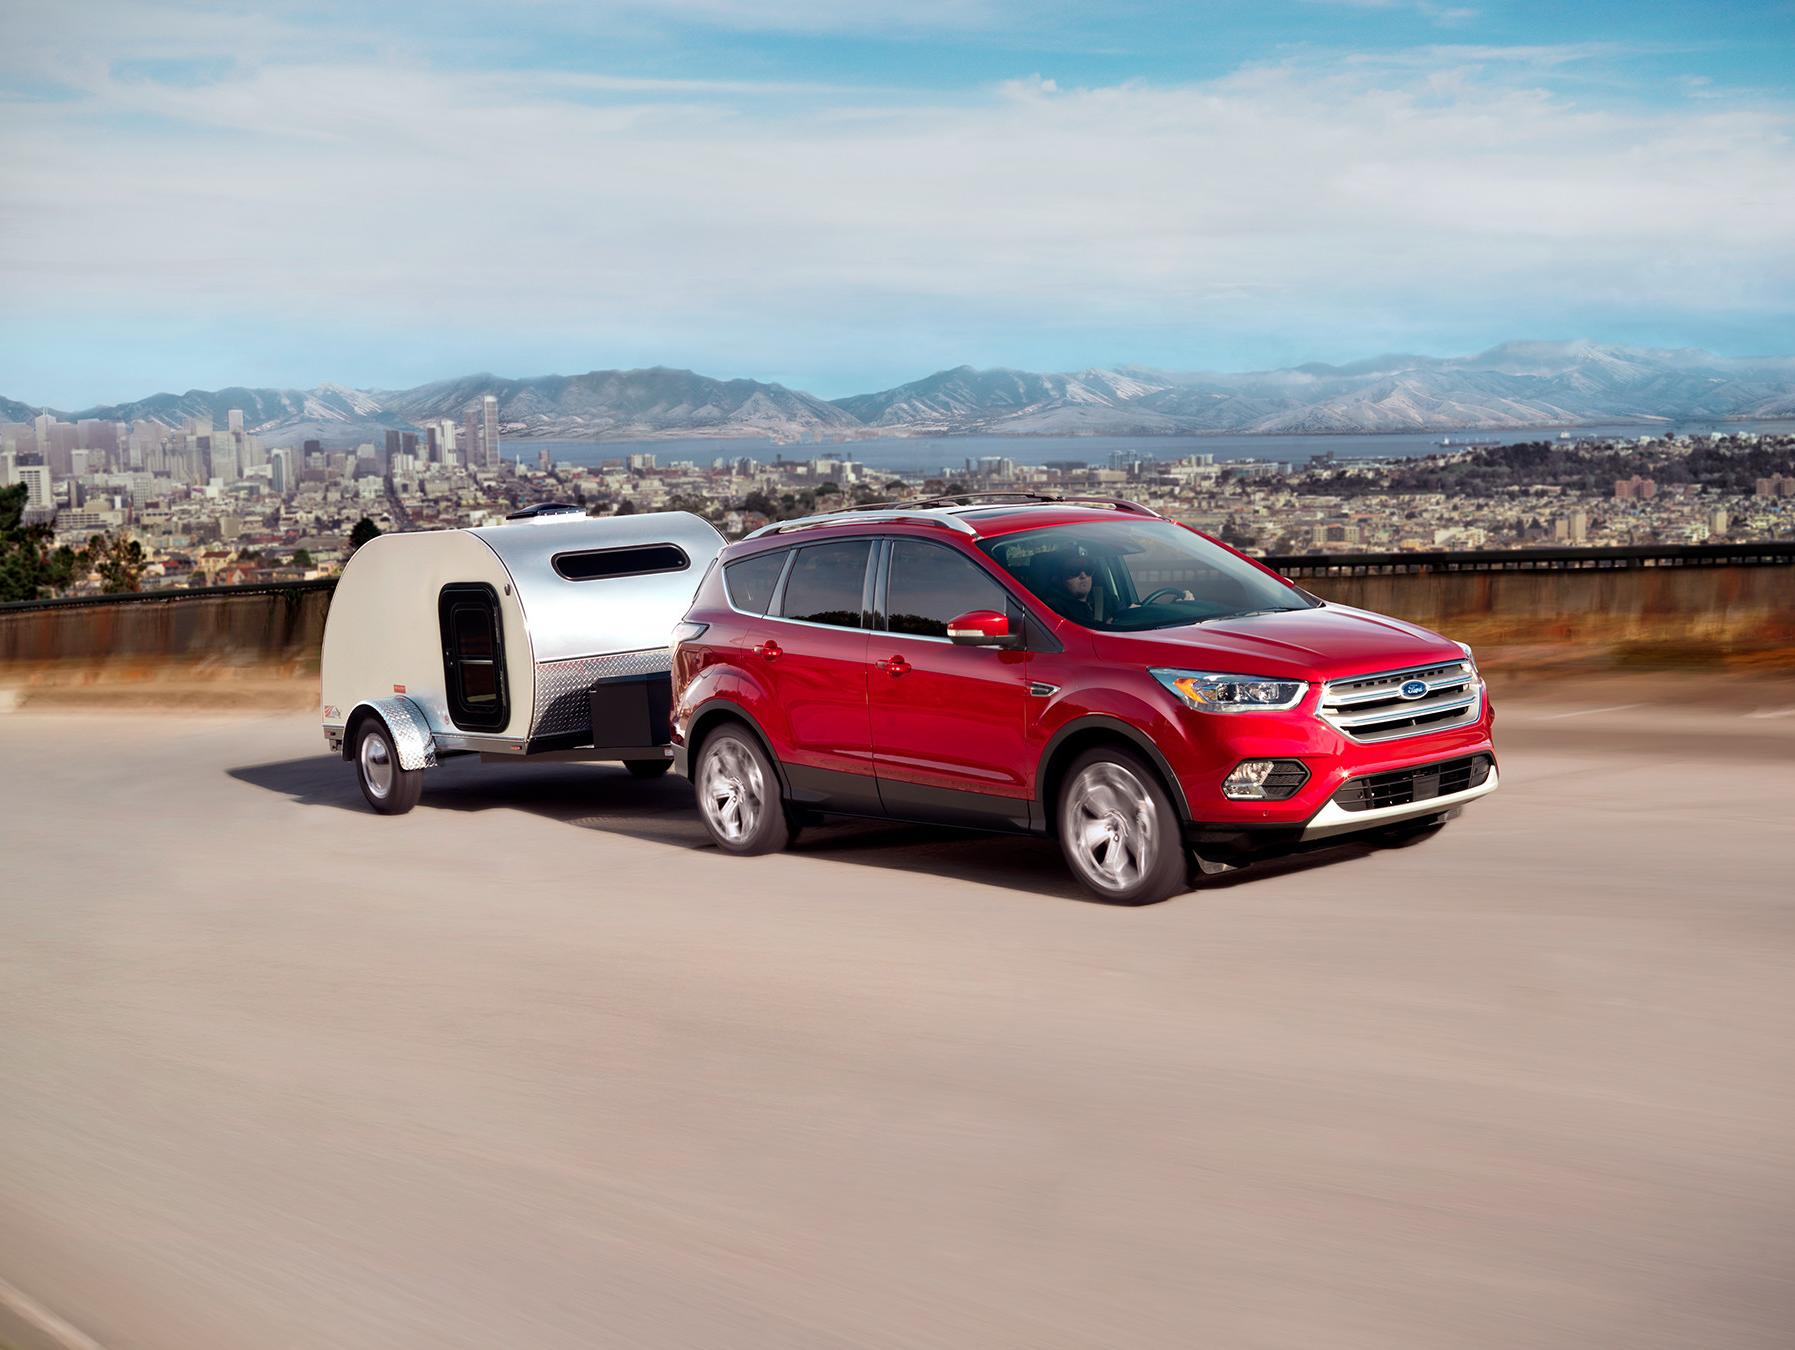 2017 Ford Explorer equipped with towing rig